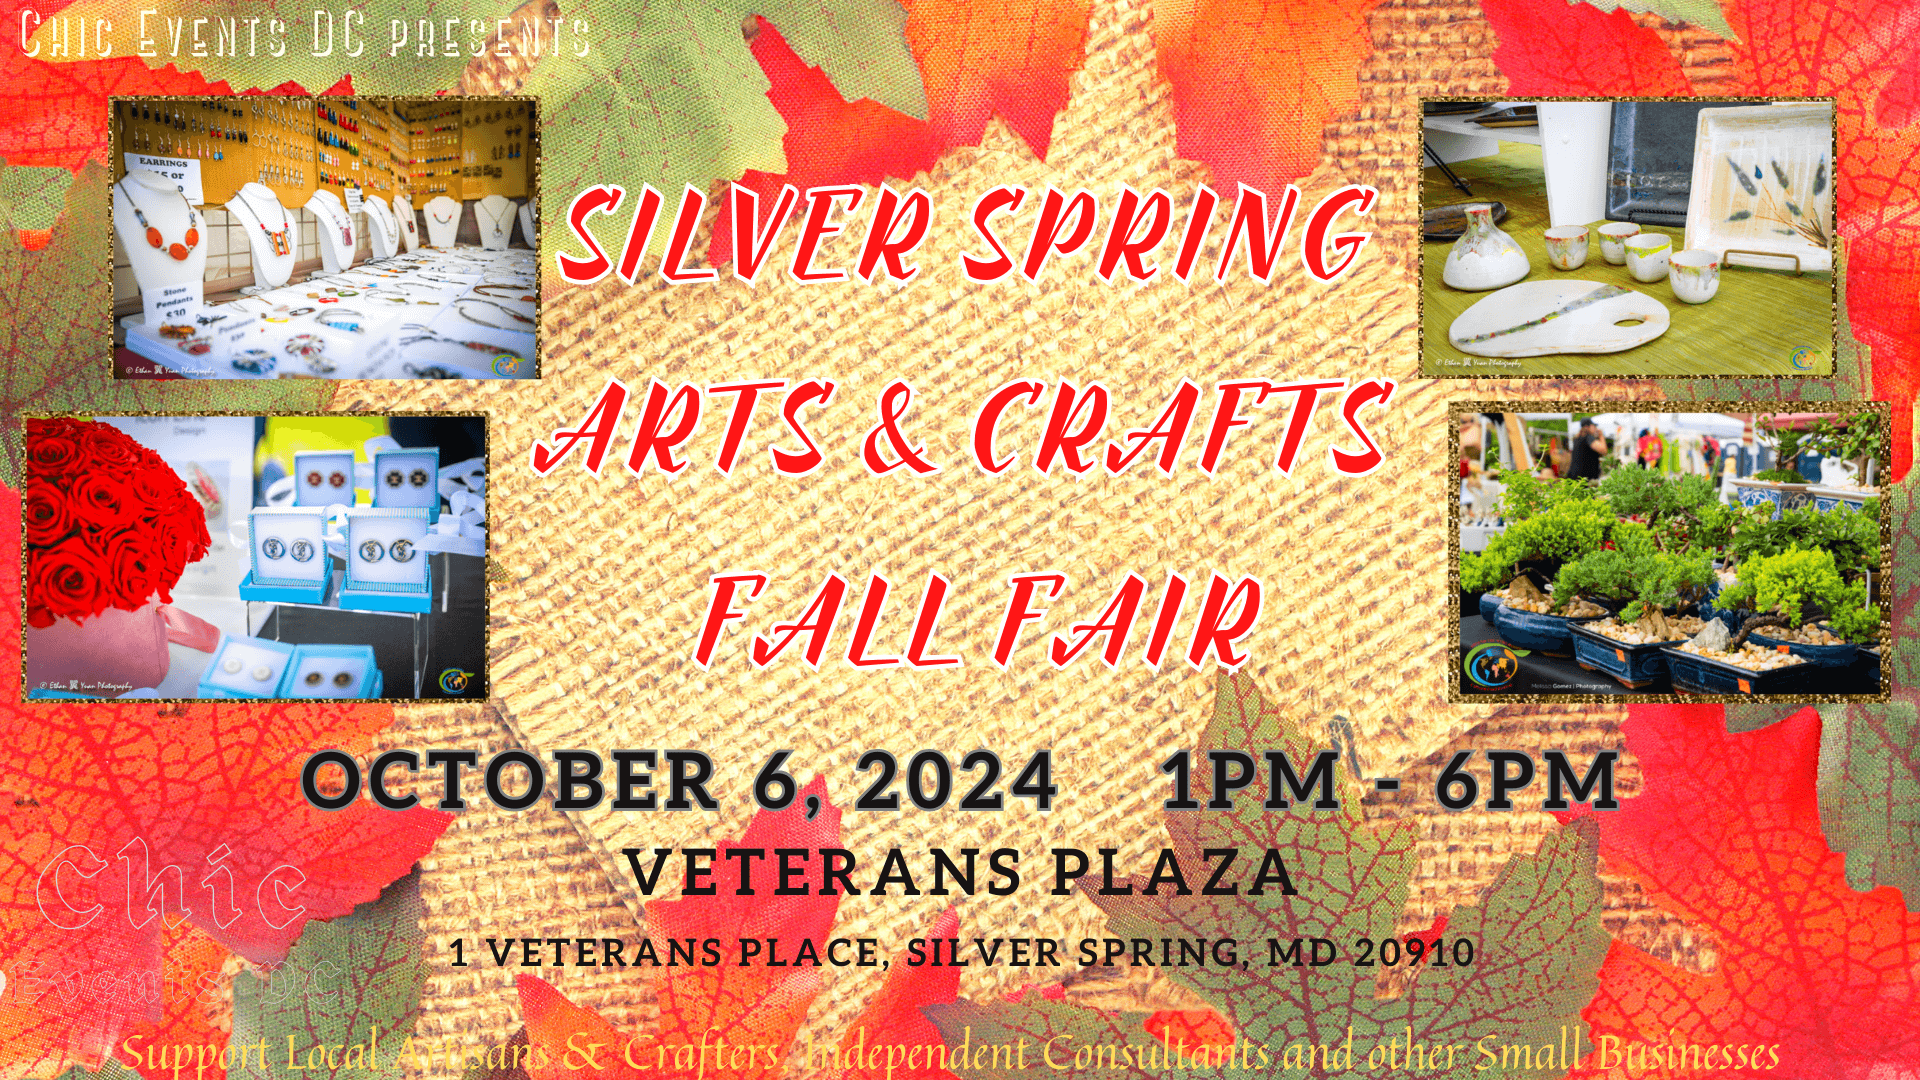 Silver Spring Arts & Crafts Fall Fair @ Veterans Plaza, Silver Spring, Maryland, United States